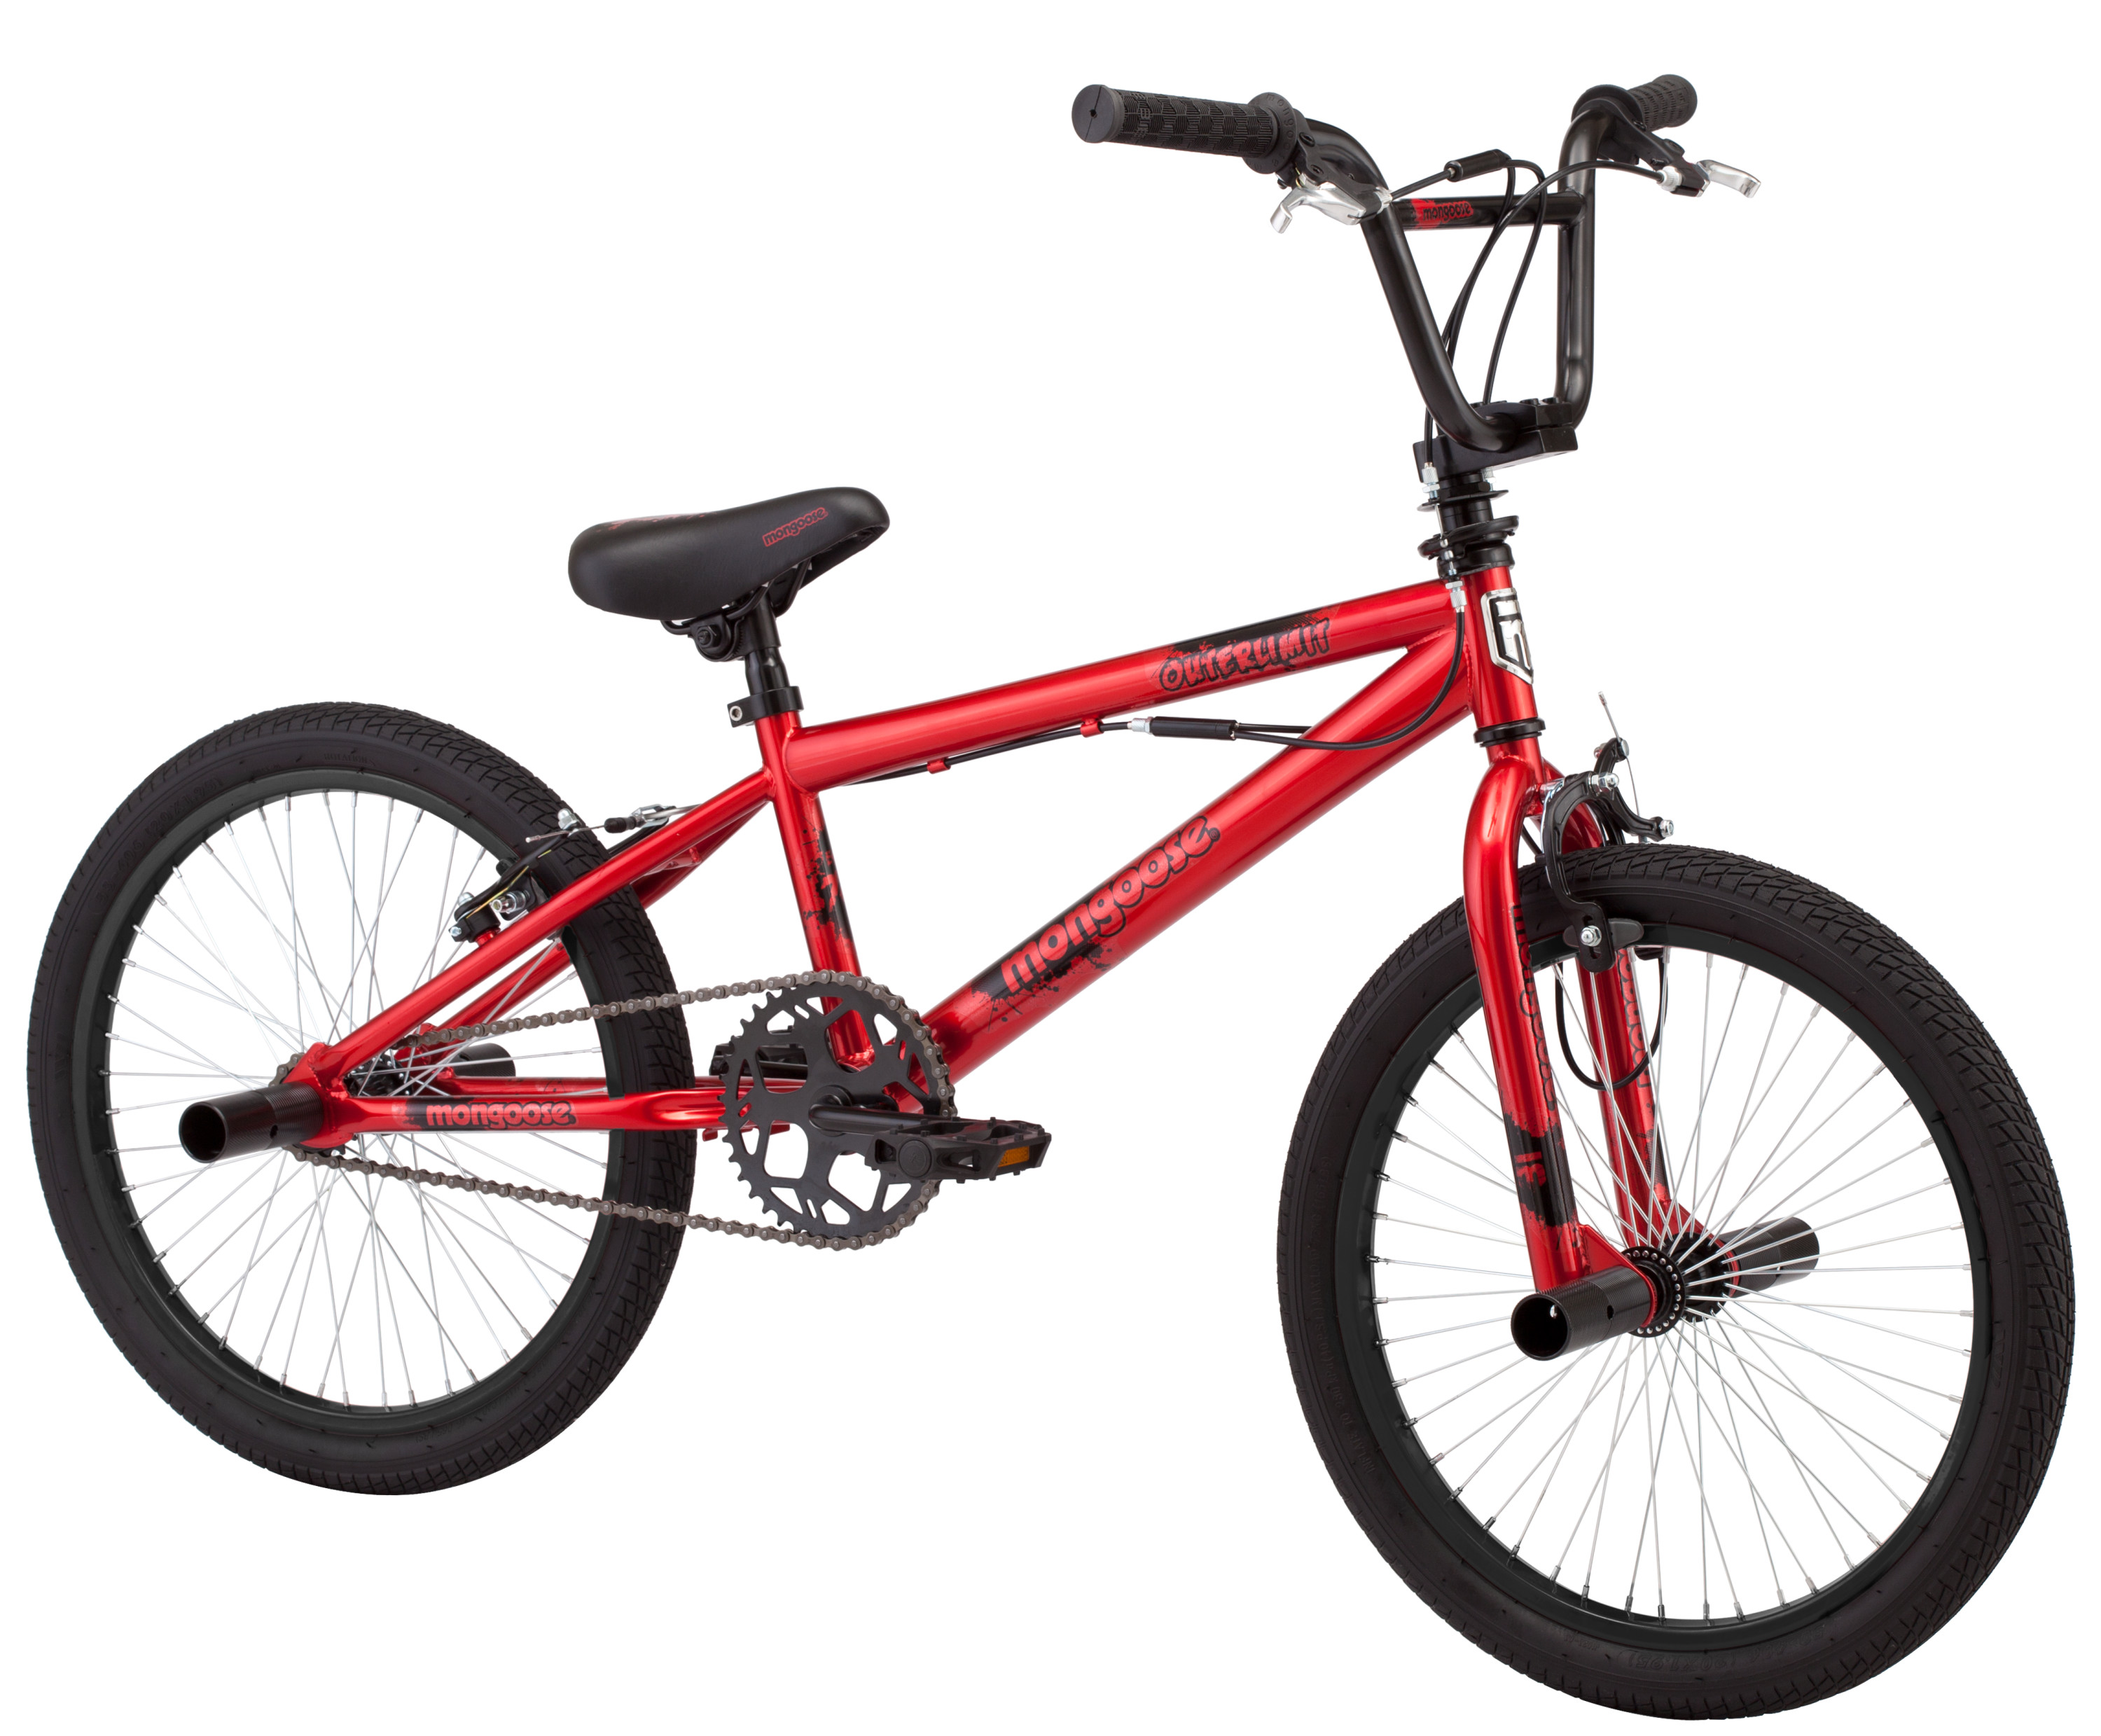 Mongoose 20" Outerlimit BMX Bike, Red - image 5 of 8